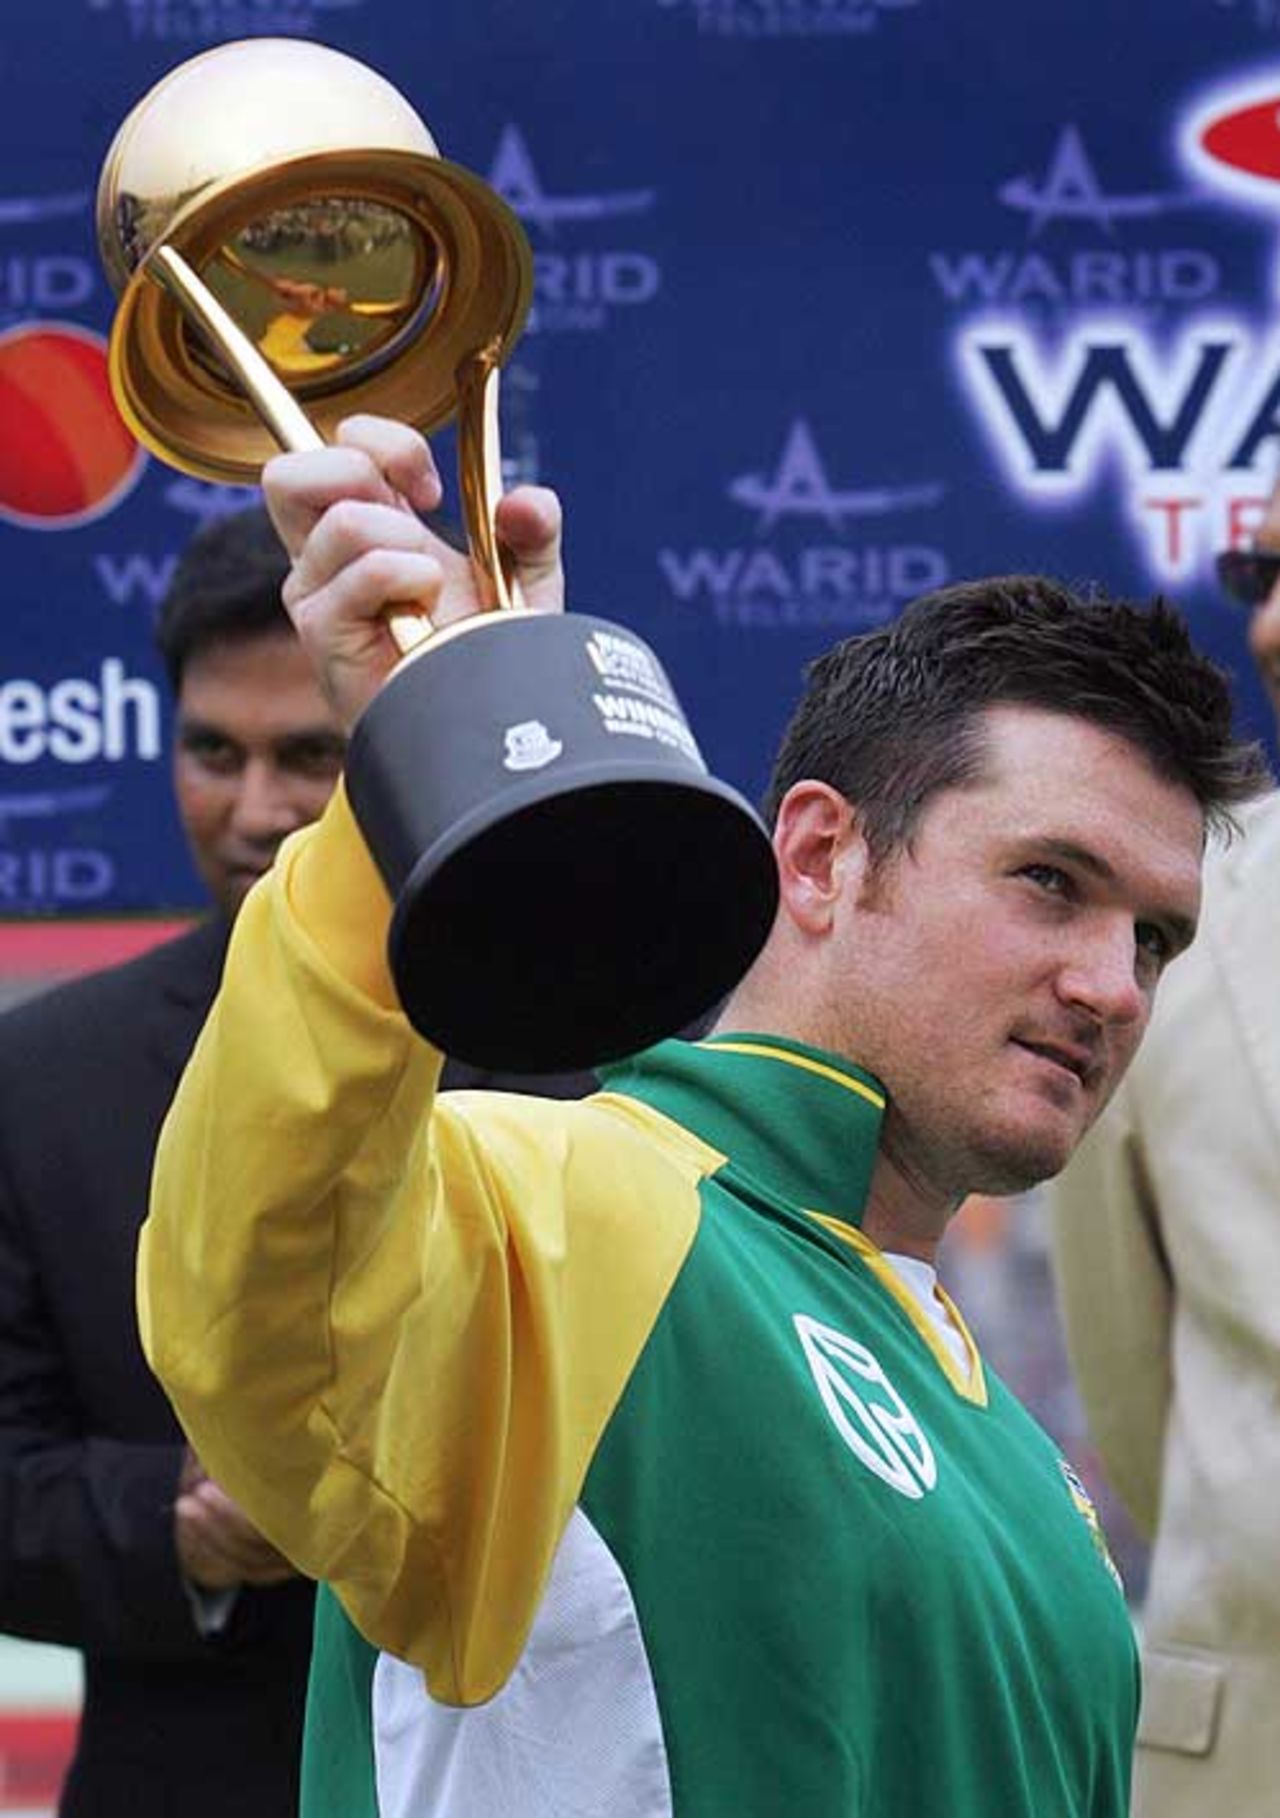 Graeme Smith with the series silverware, Bangladesh v South Africa, 3rd ODI, Mirpur, March 14, 2008 
